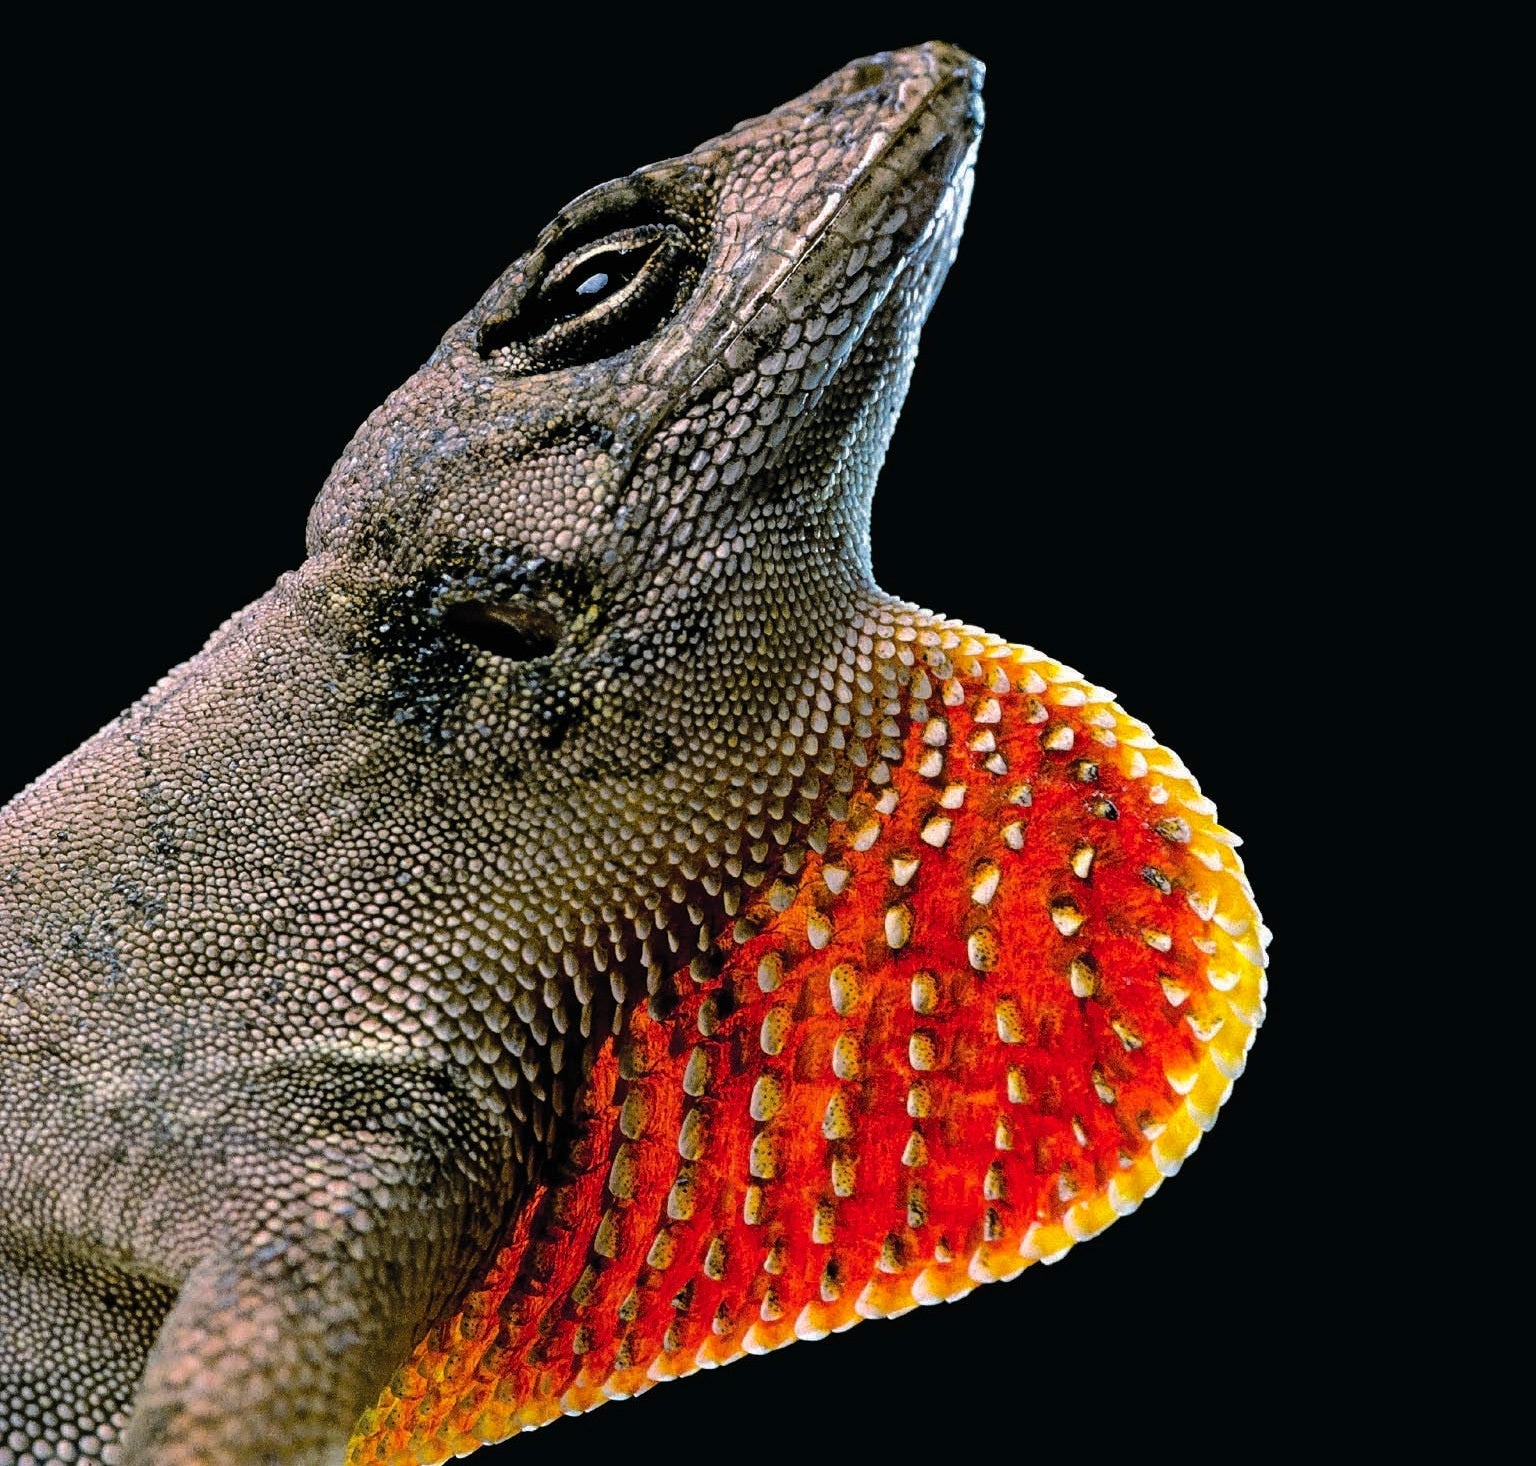 Living Fossil' Lizards Are Constantly Evolving--You Just Can't See It